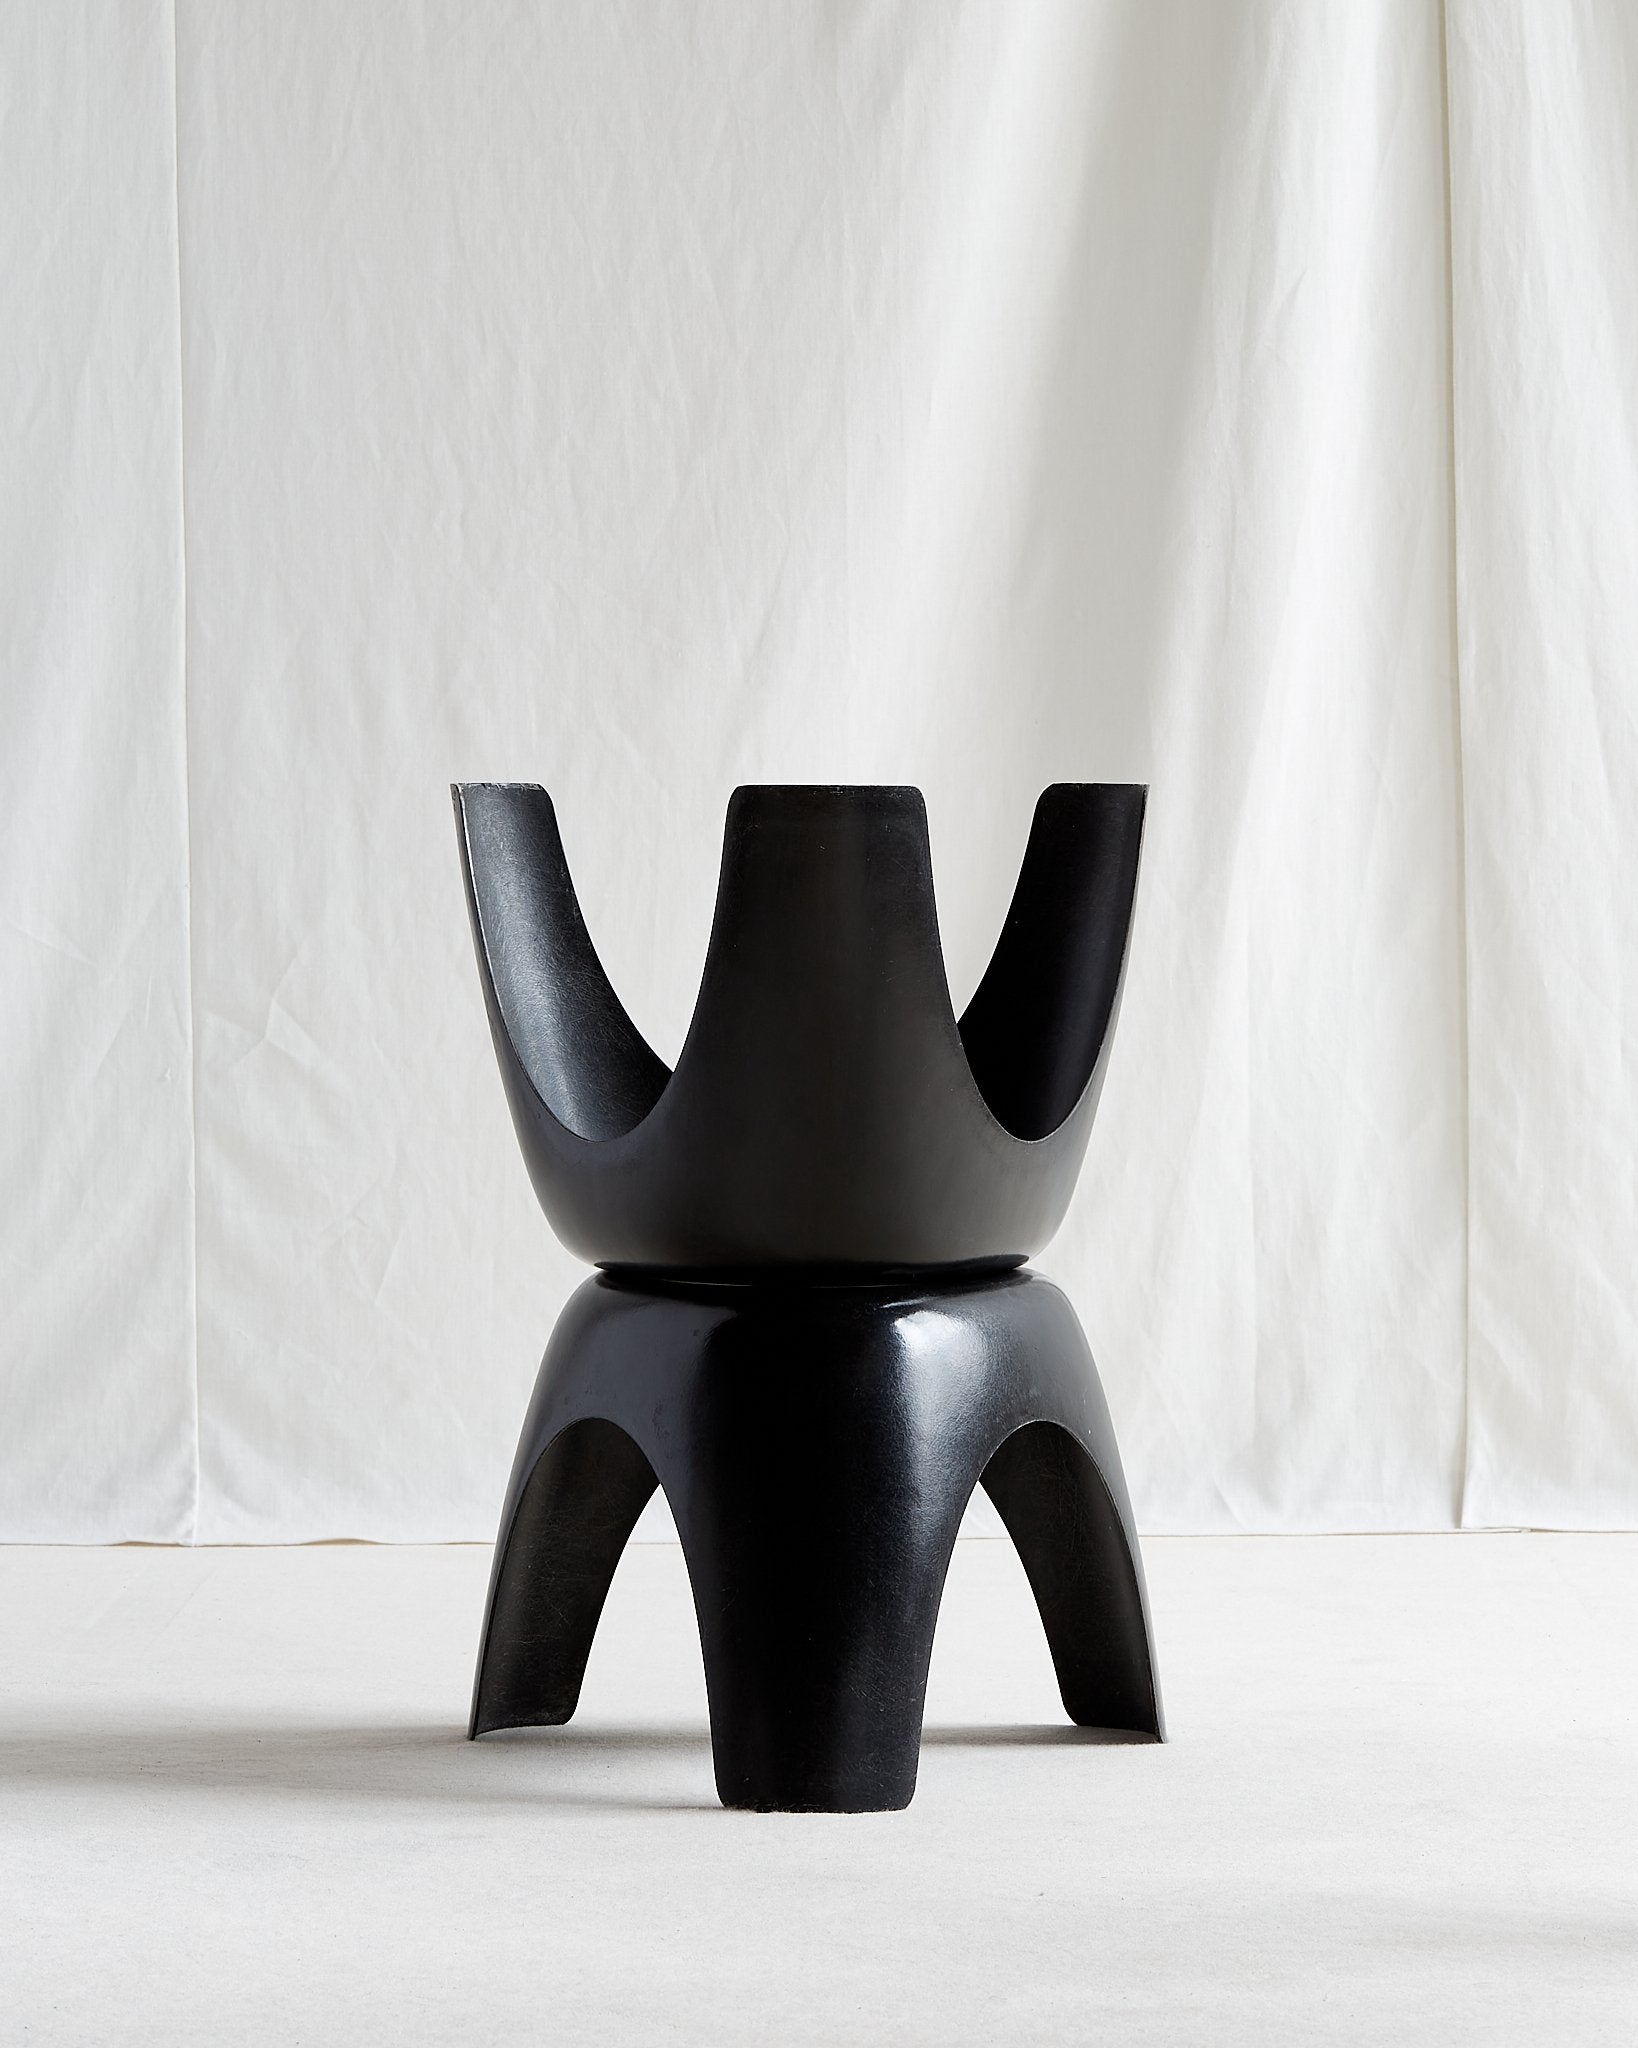 Pair of black Sori Yanagi Elephant Stools by Kotobuki, Japan c. 1950s.

Yanagi foil sticker on underside.

Originally designed by Yanagi as a work chair for his studio, the stool was released by Kotobuki a couple of years later after the company